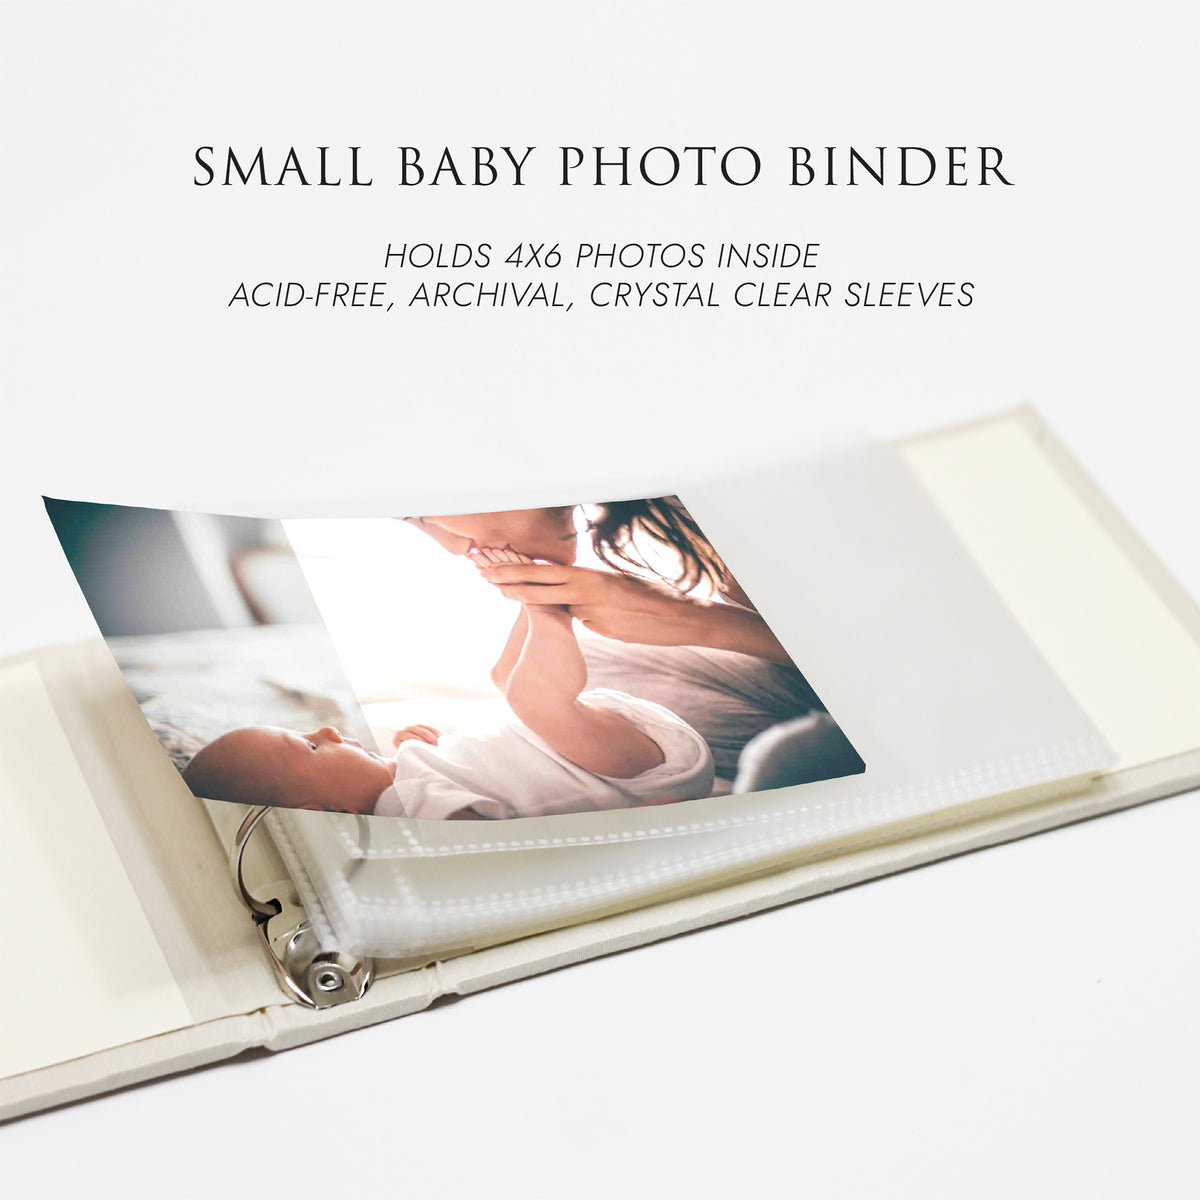 Small Baby Photo Binder | for 4x6 Photos | with Misty Blue SIlk Cover | Includes BABY Title On Cover